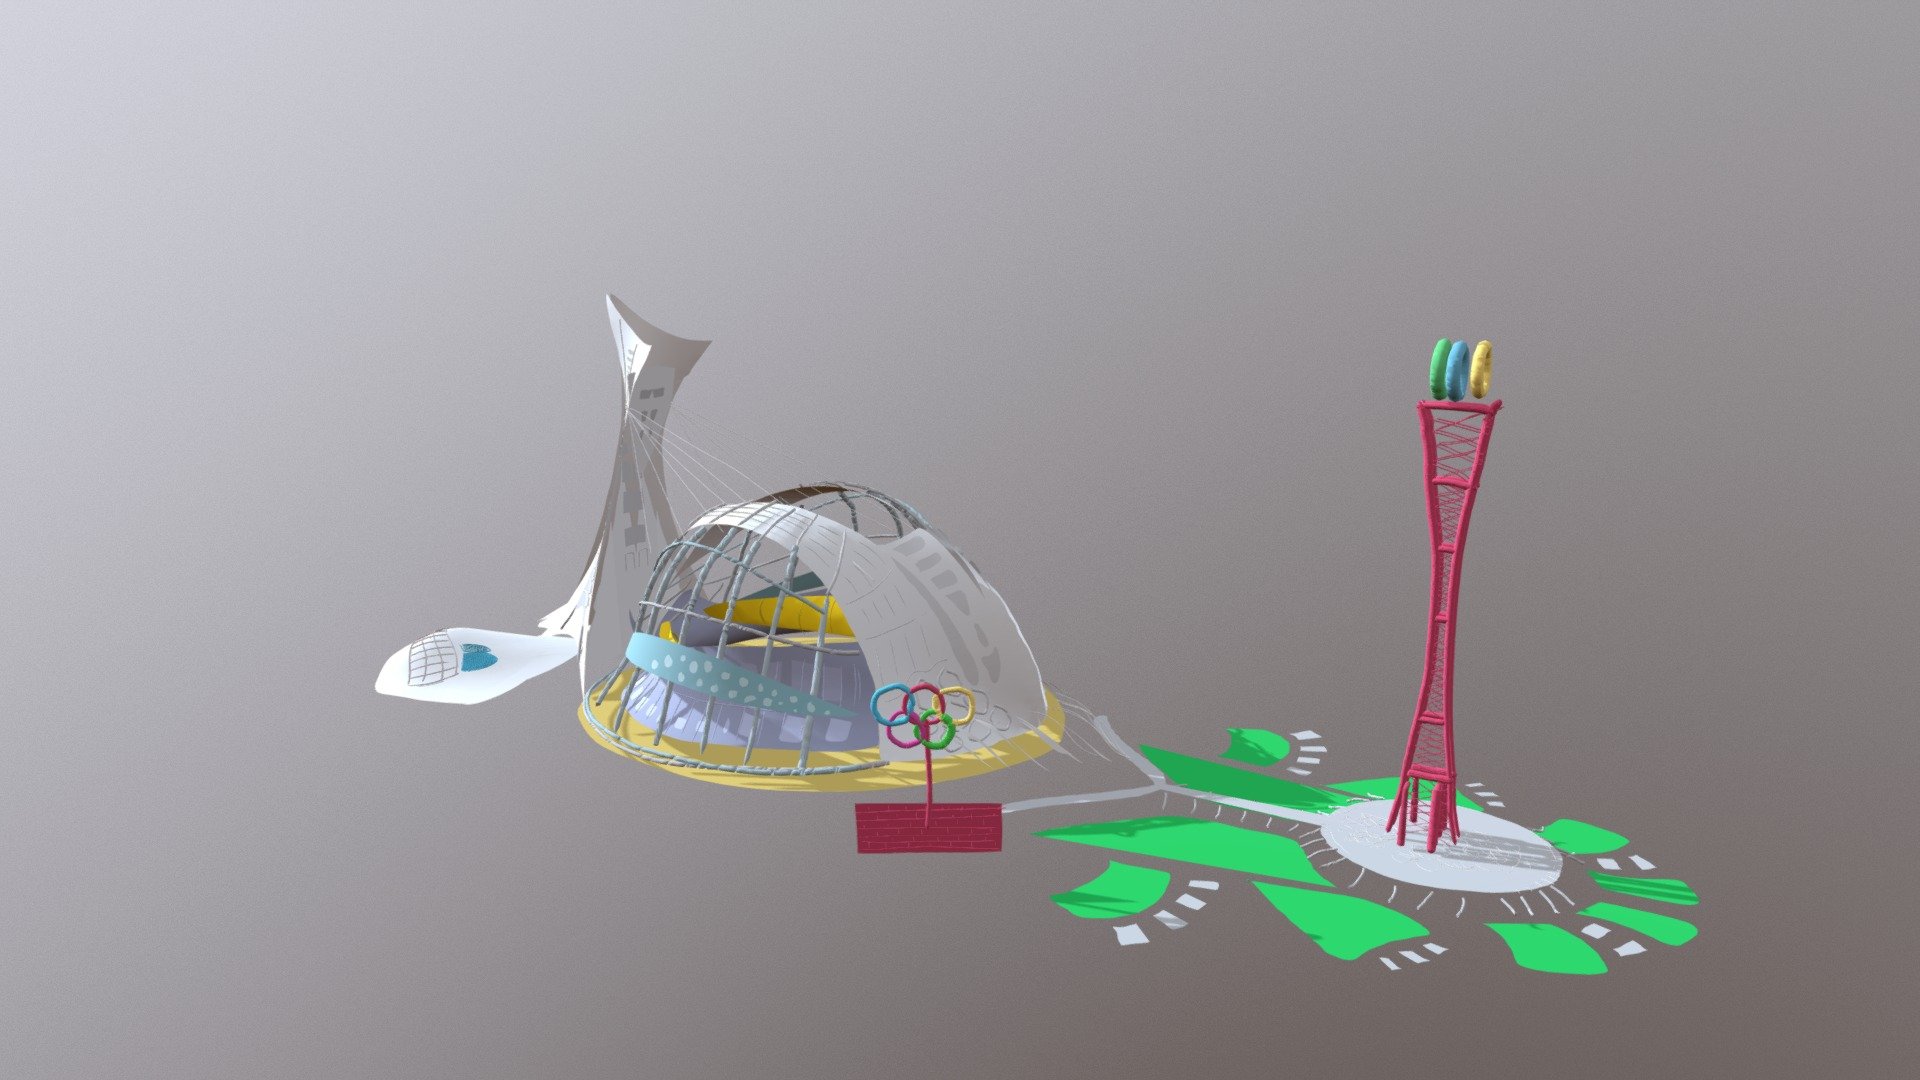 Created using a research prototype tool for AR sketching: SymbiosisSketch. More info here: http://www.dgp.toronto.edu/~arorar - Montreal Olympic Stadium - Download Free 3D model by rarora7777 3d model